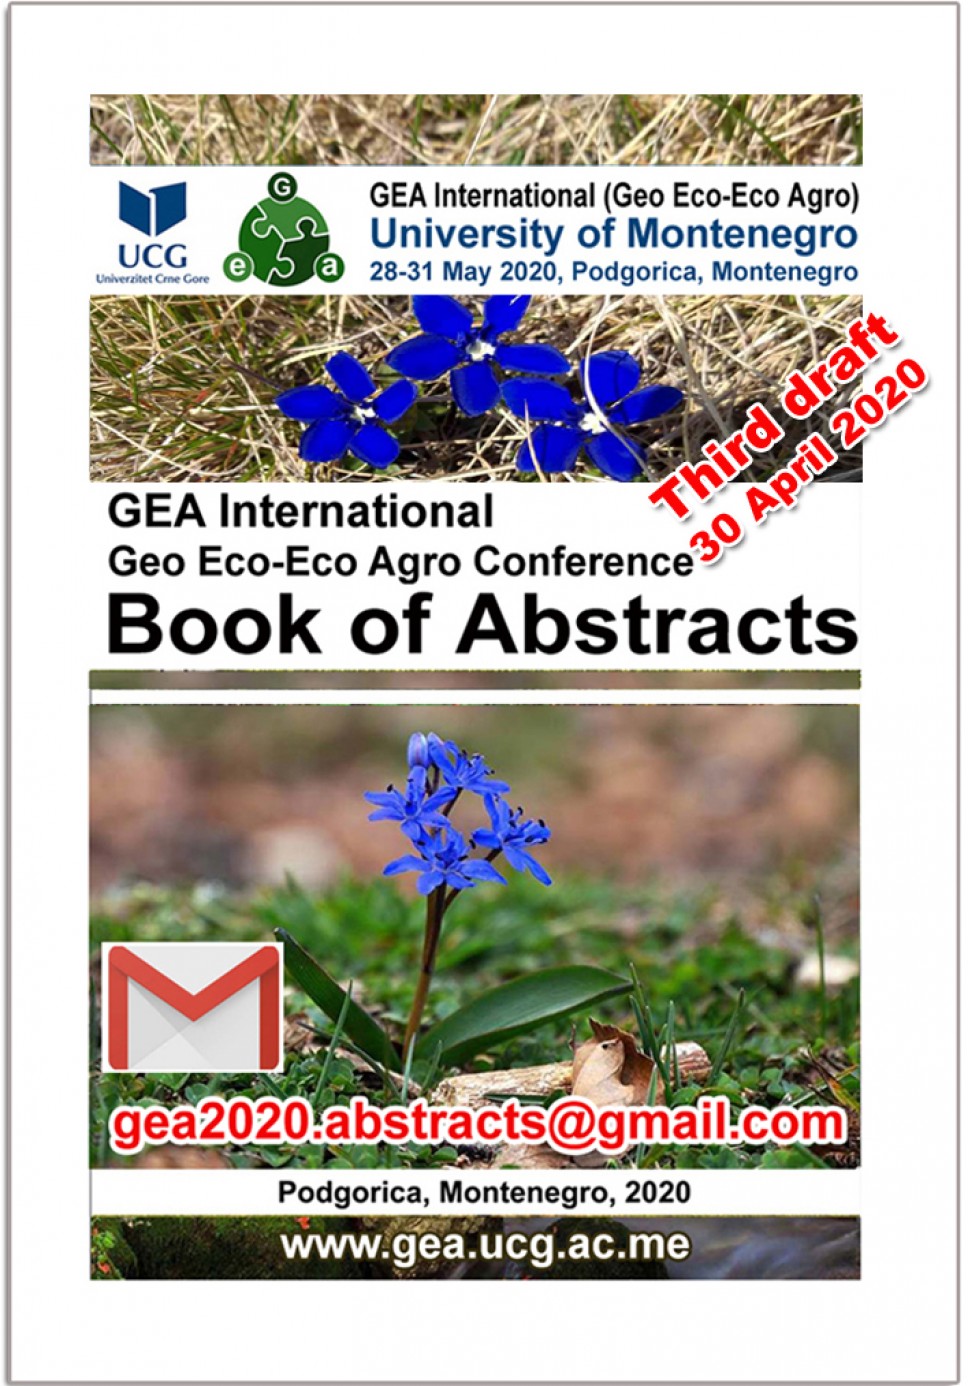 The draft Book of Abstracts of the GEA International (GeoEco-Eco Agro) Conference available online